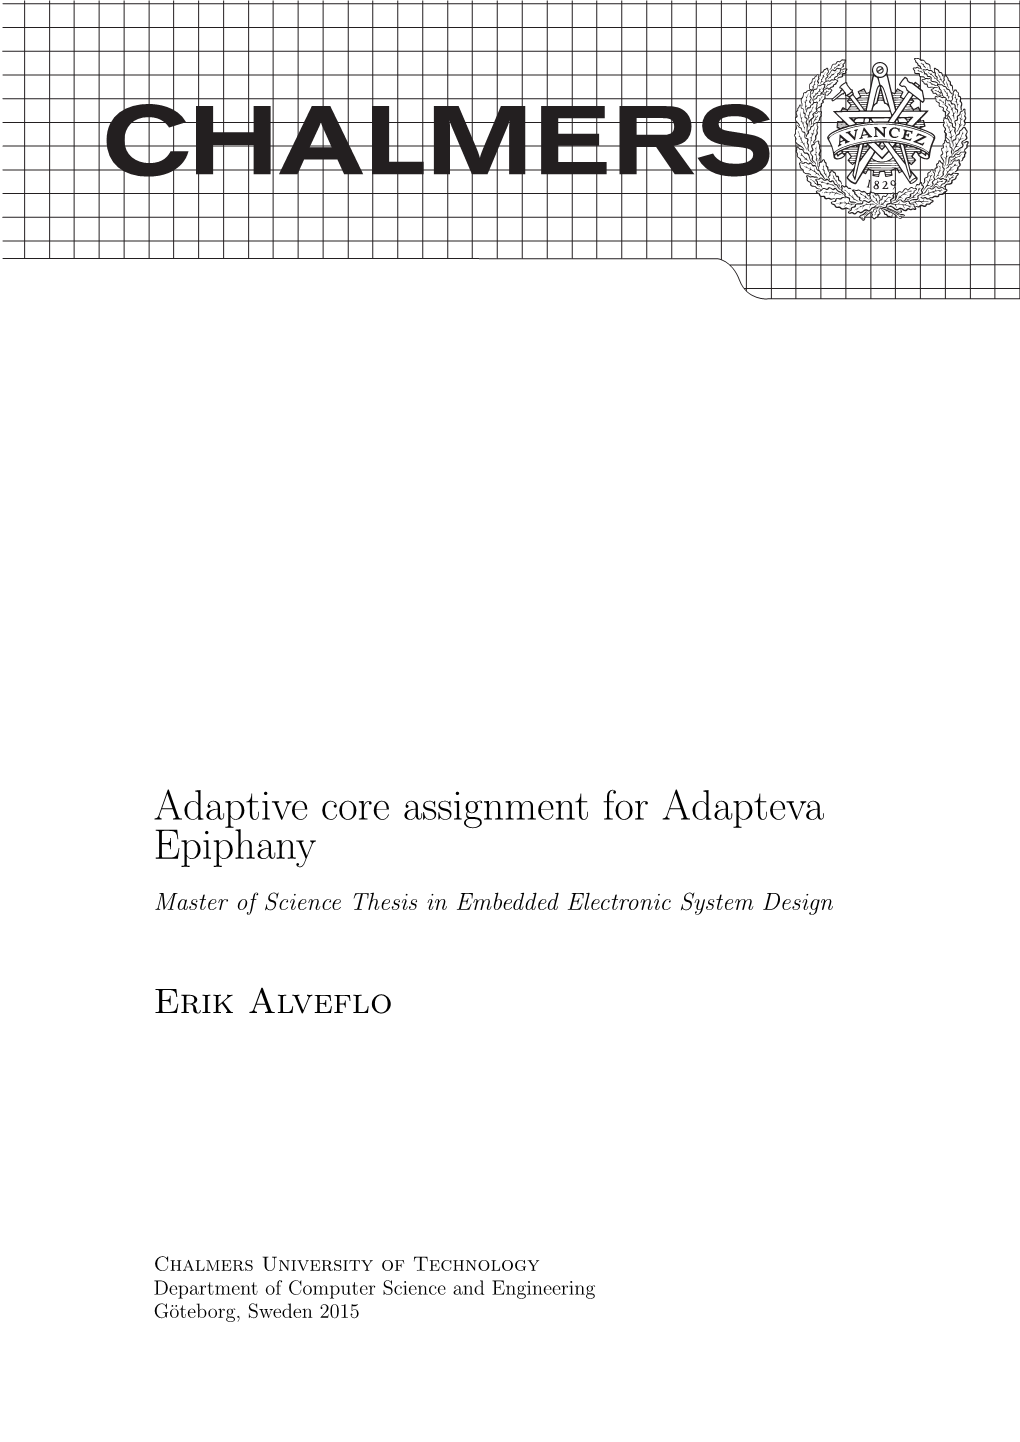 Master's Thesis: Adaptive Core Assignment for Adapteva Epiphany